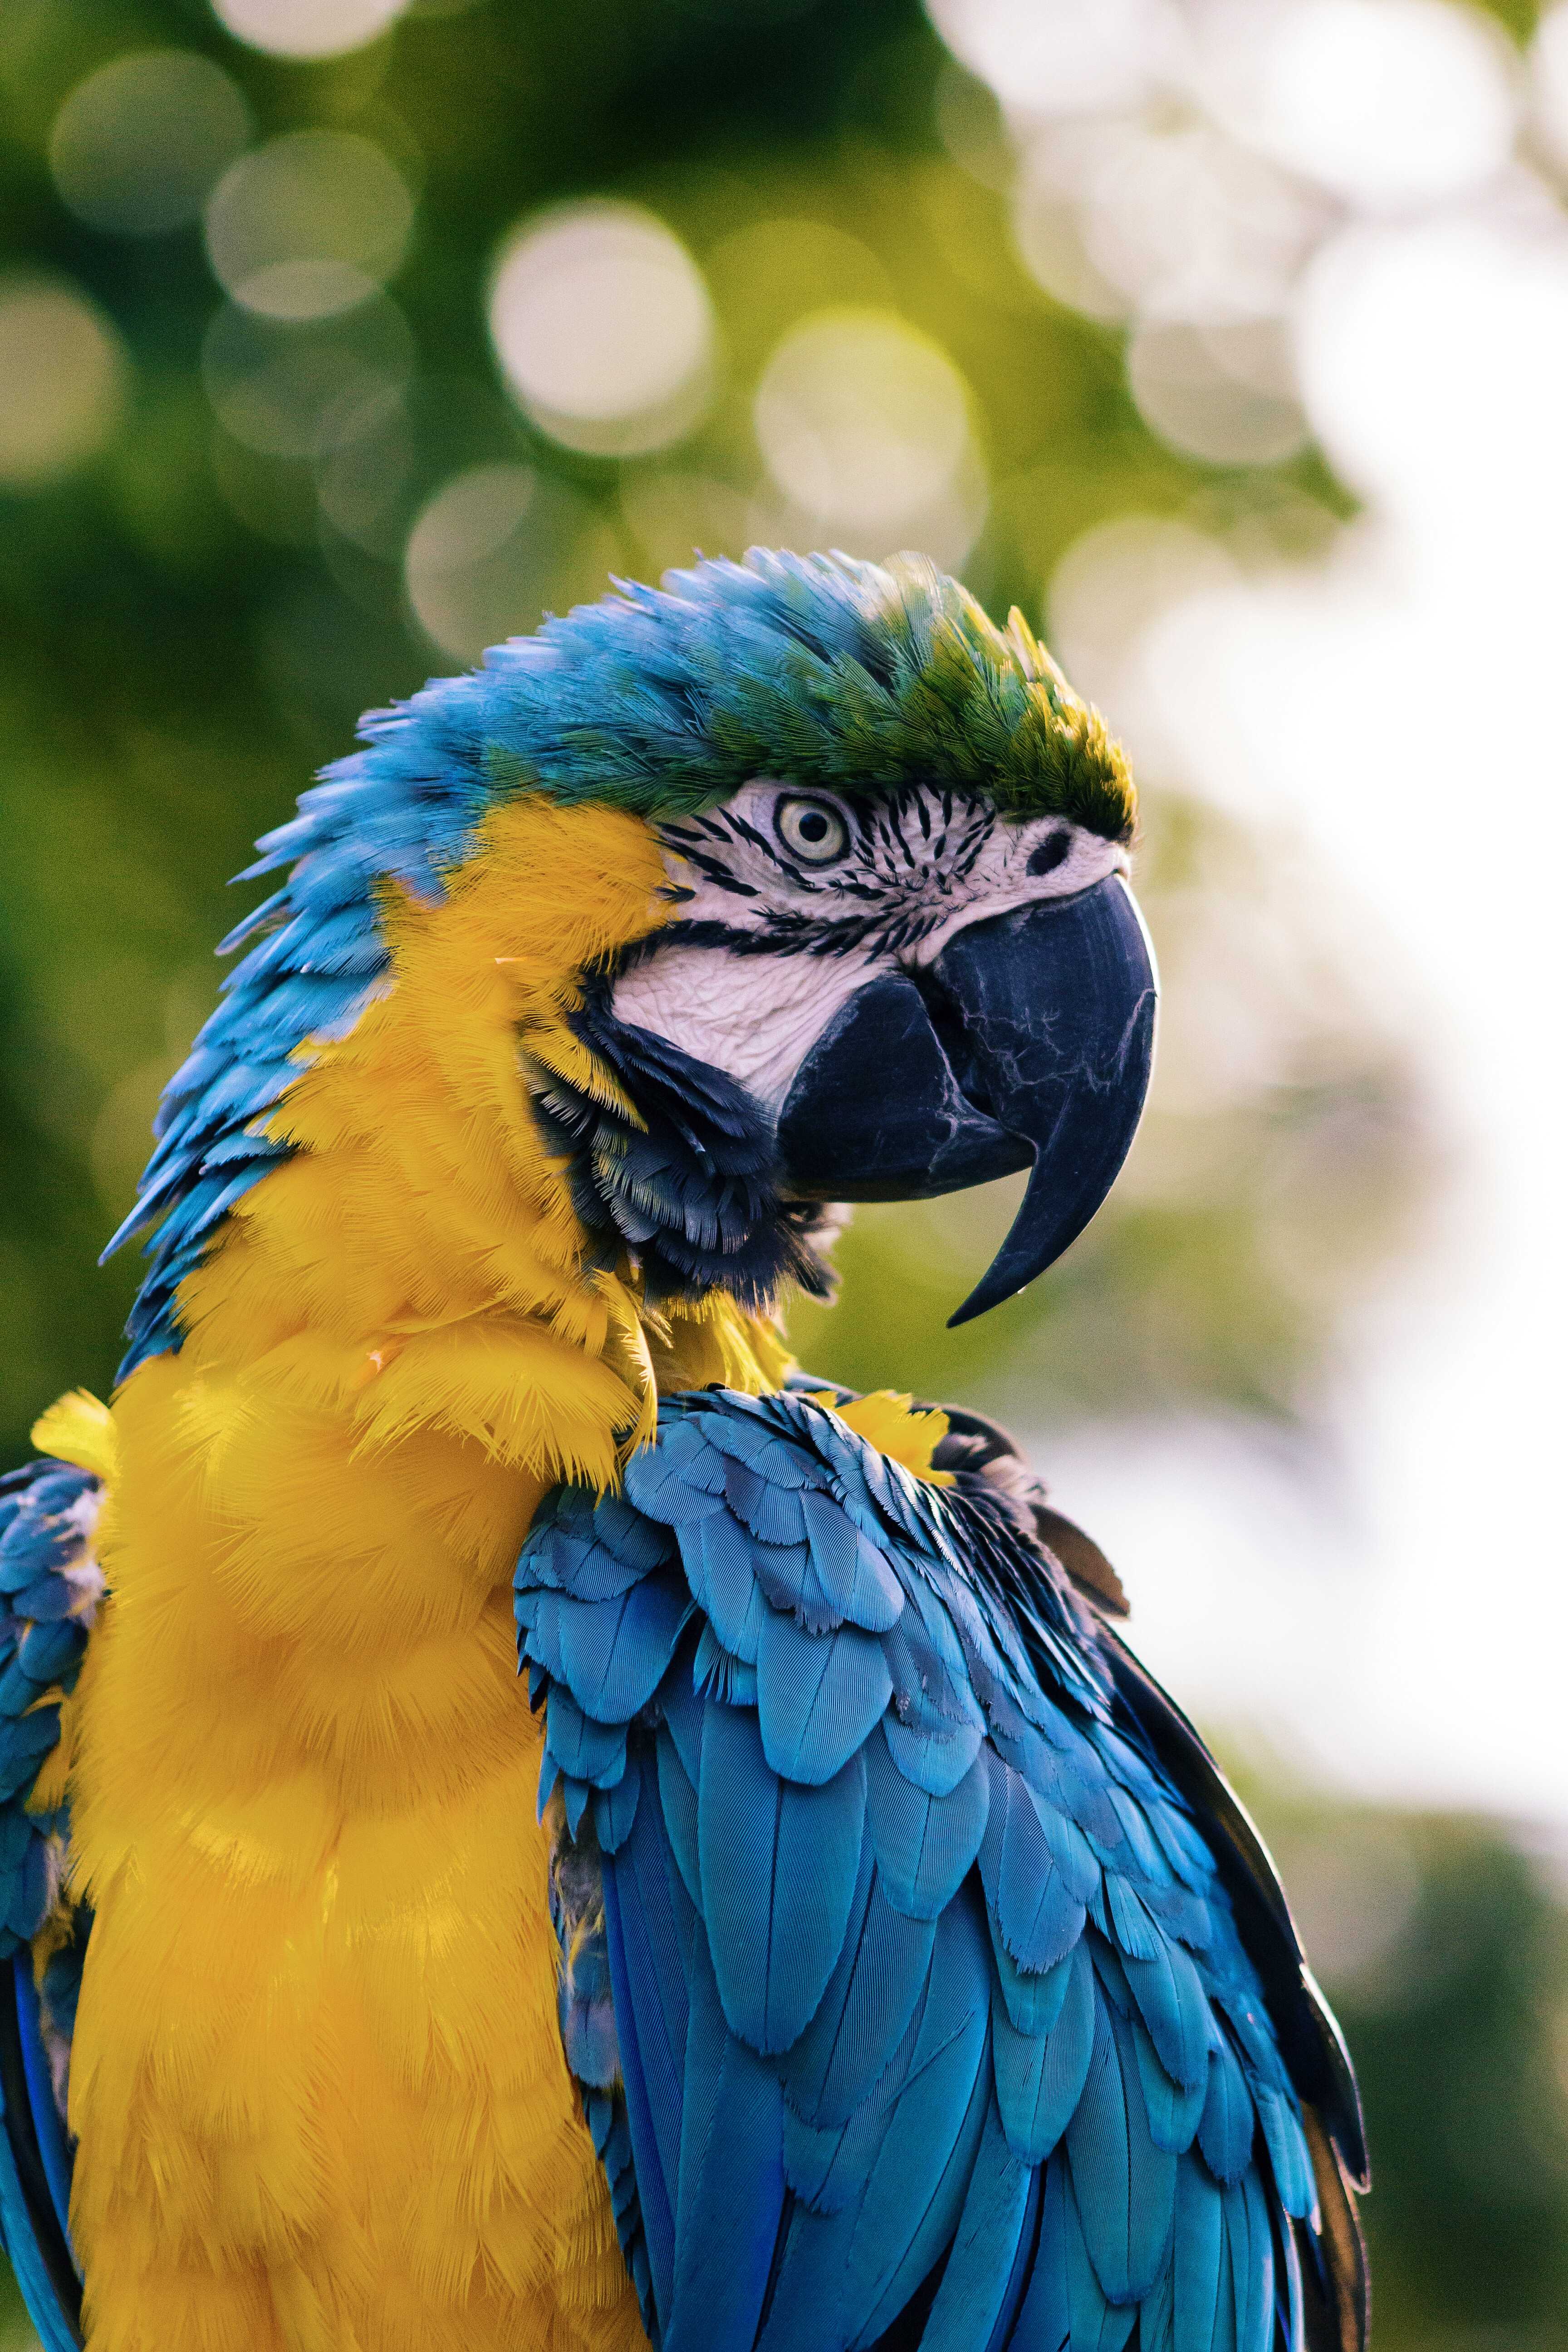 Macaw parrot by Andrew Pons